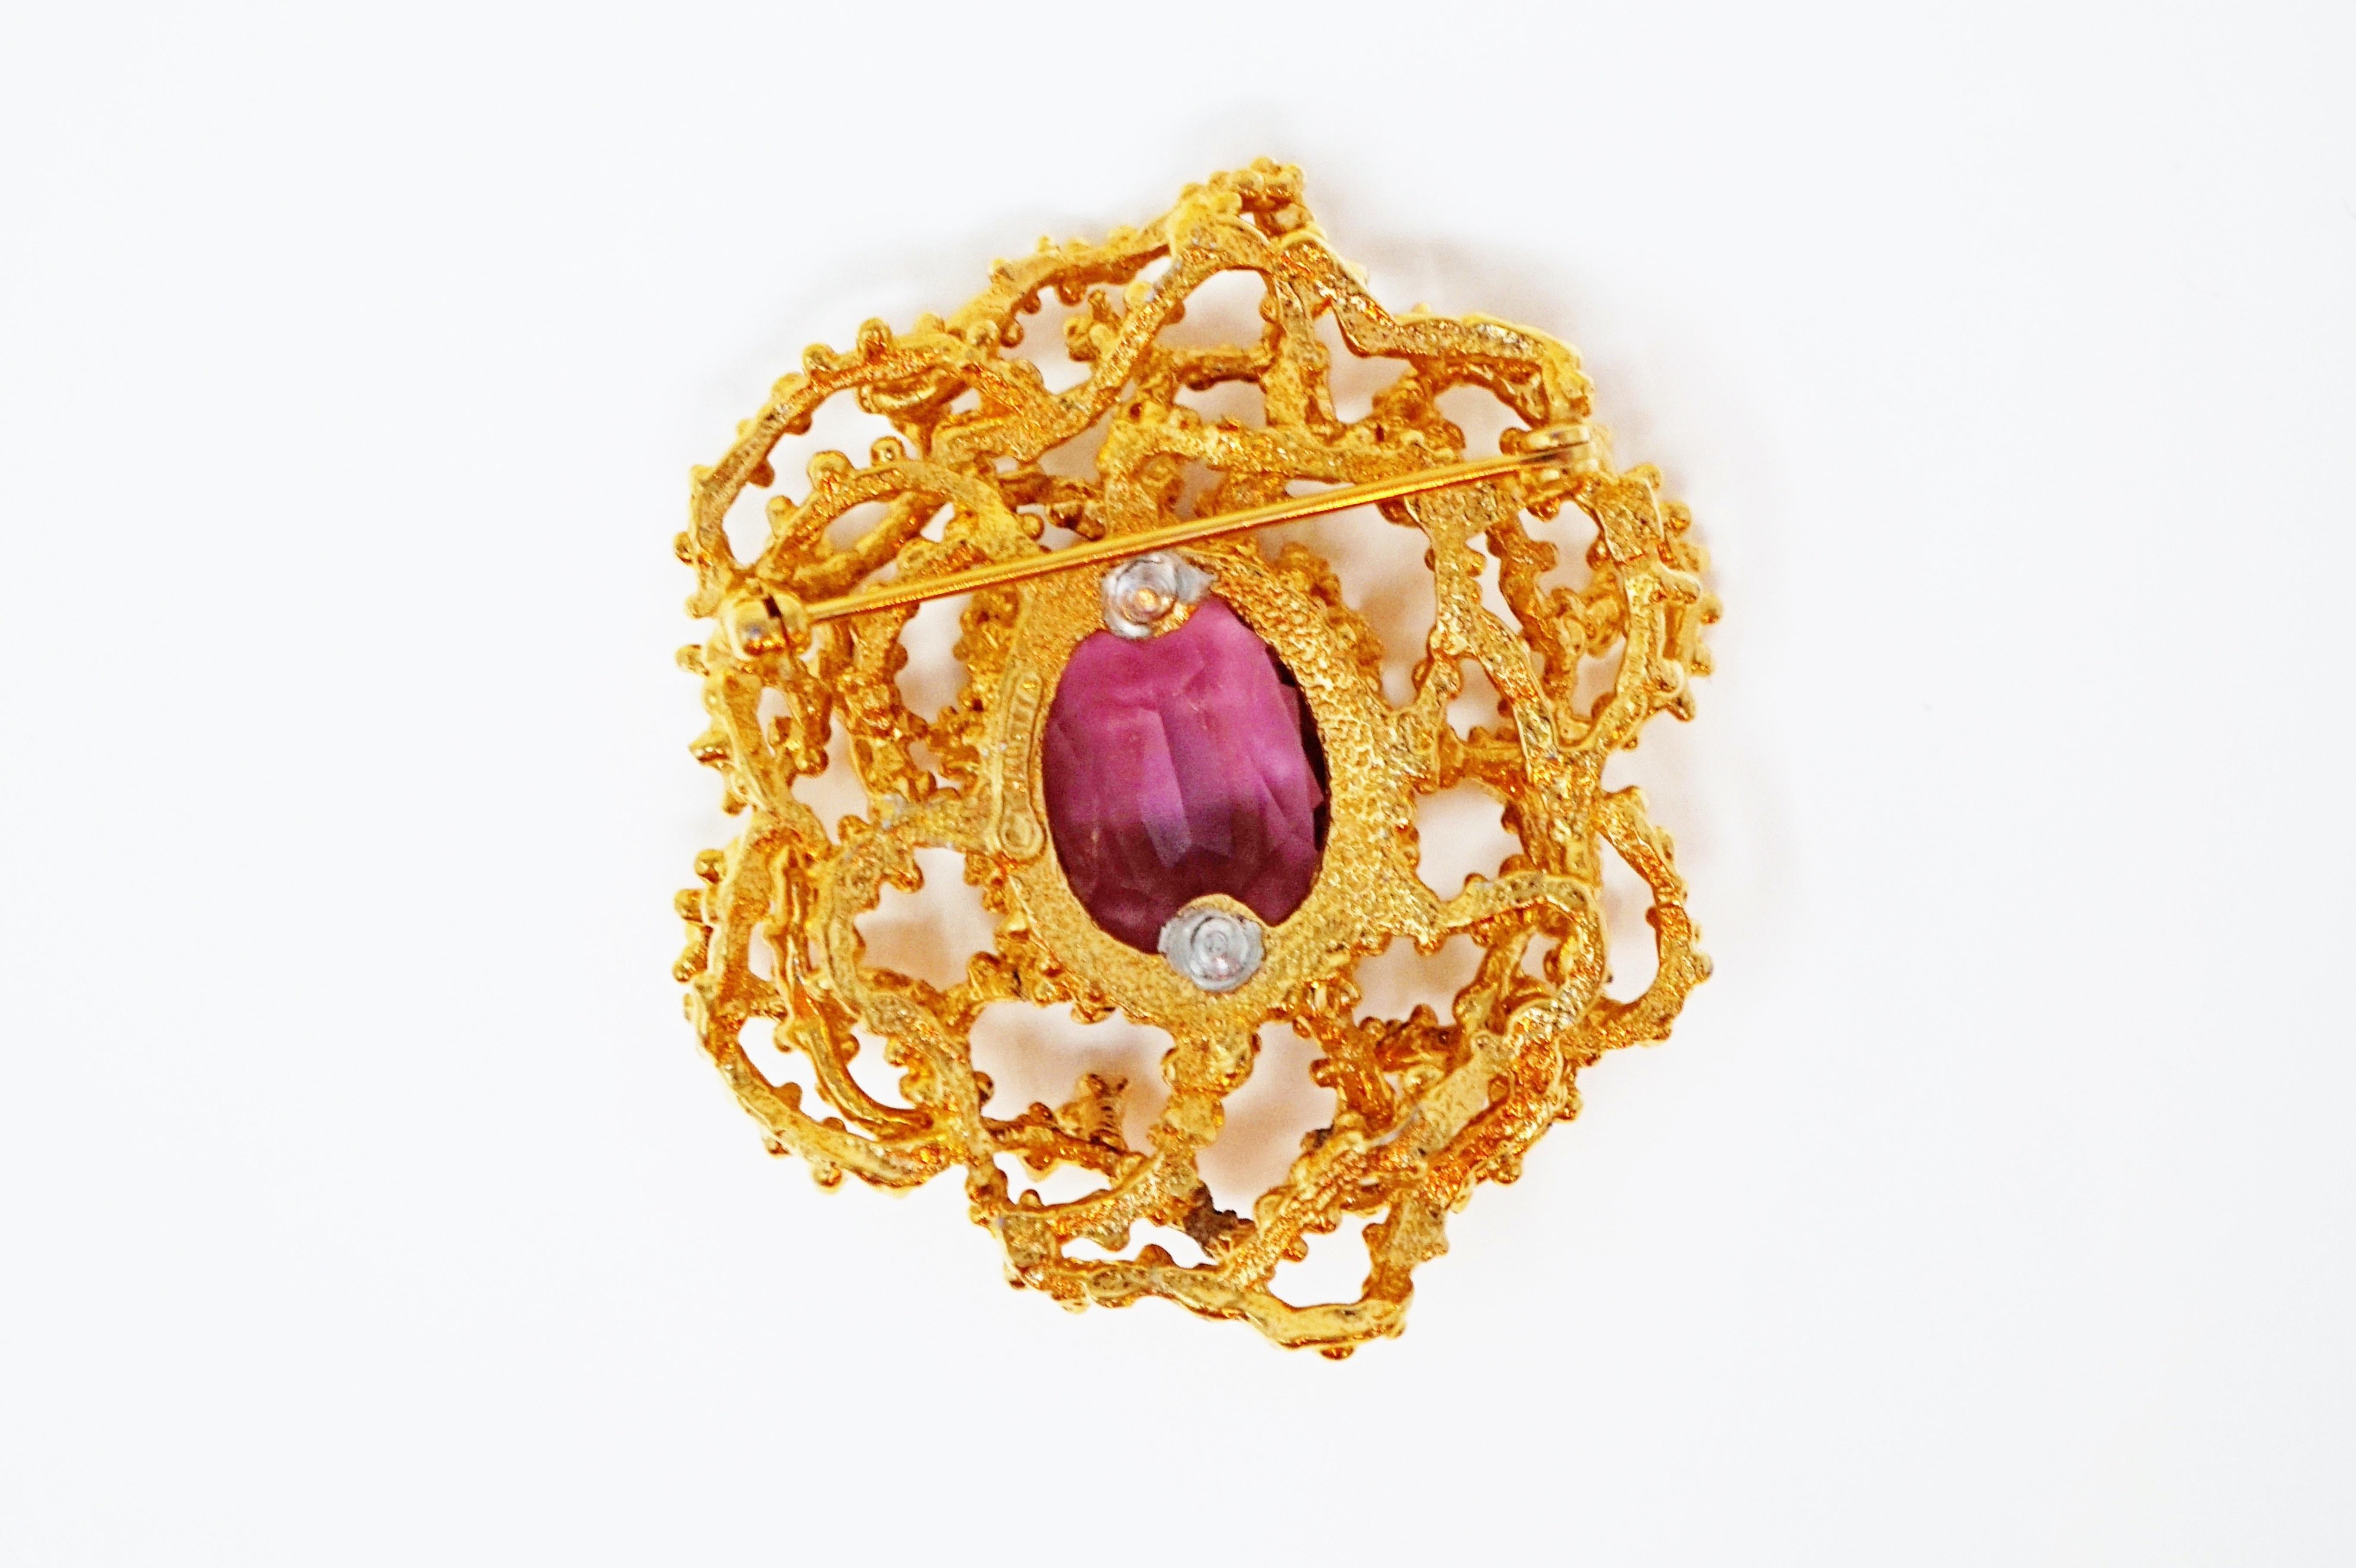 Gilded Brutalist Brooch with Amethyst Crystal by Panetta, Signed, circa 1960 3